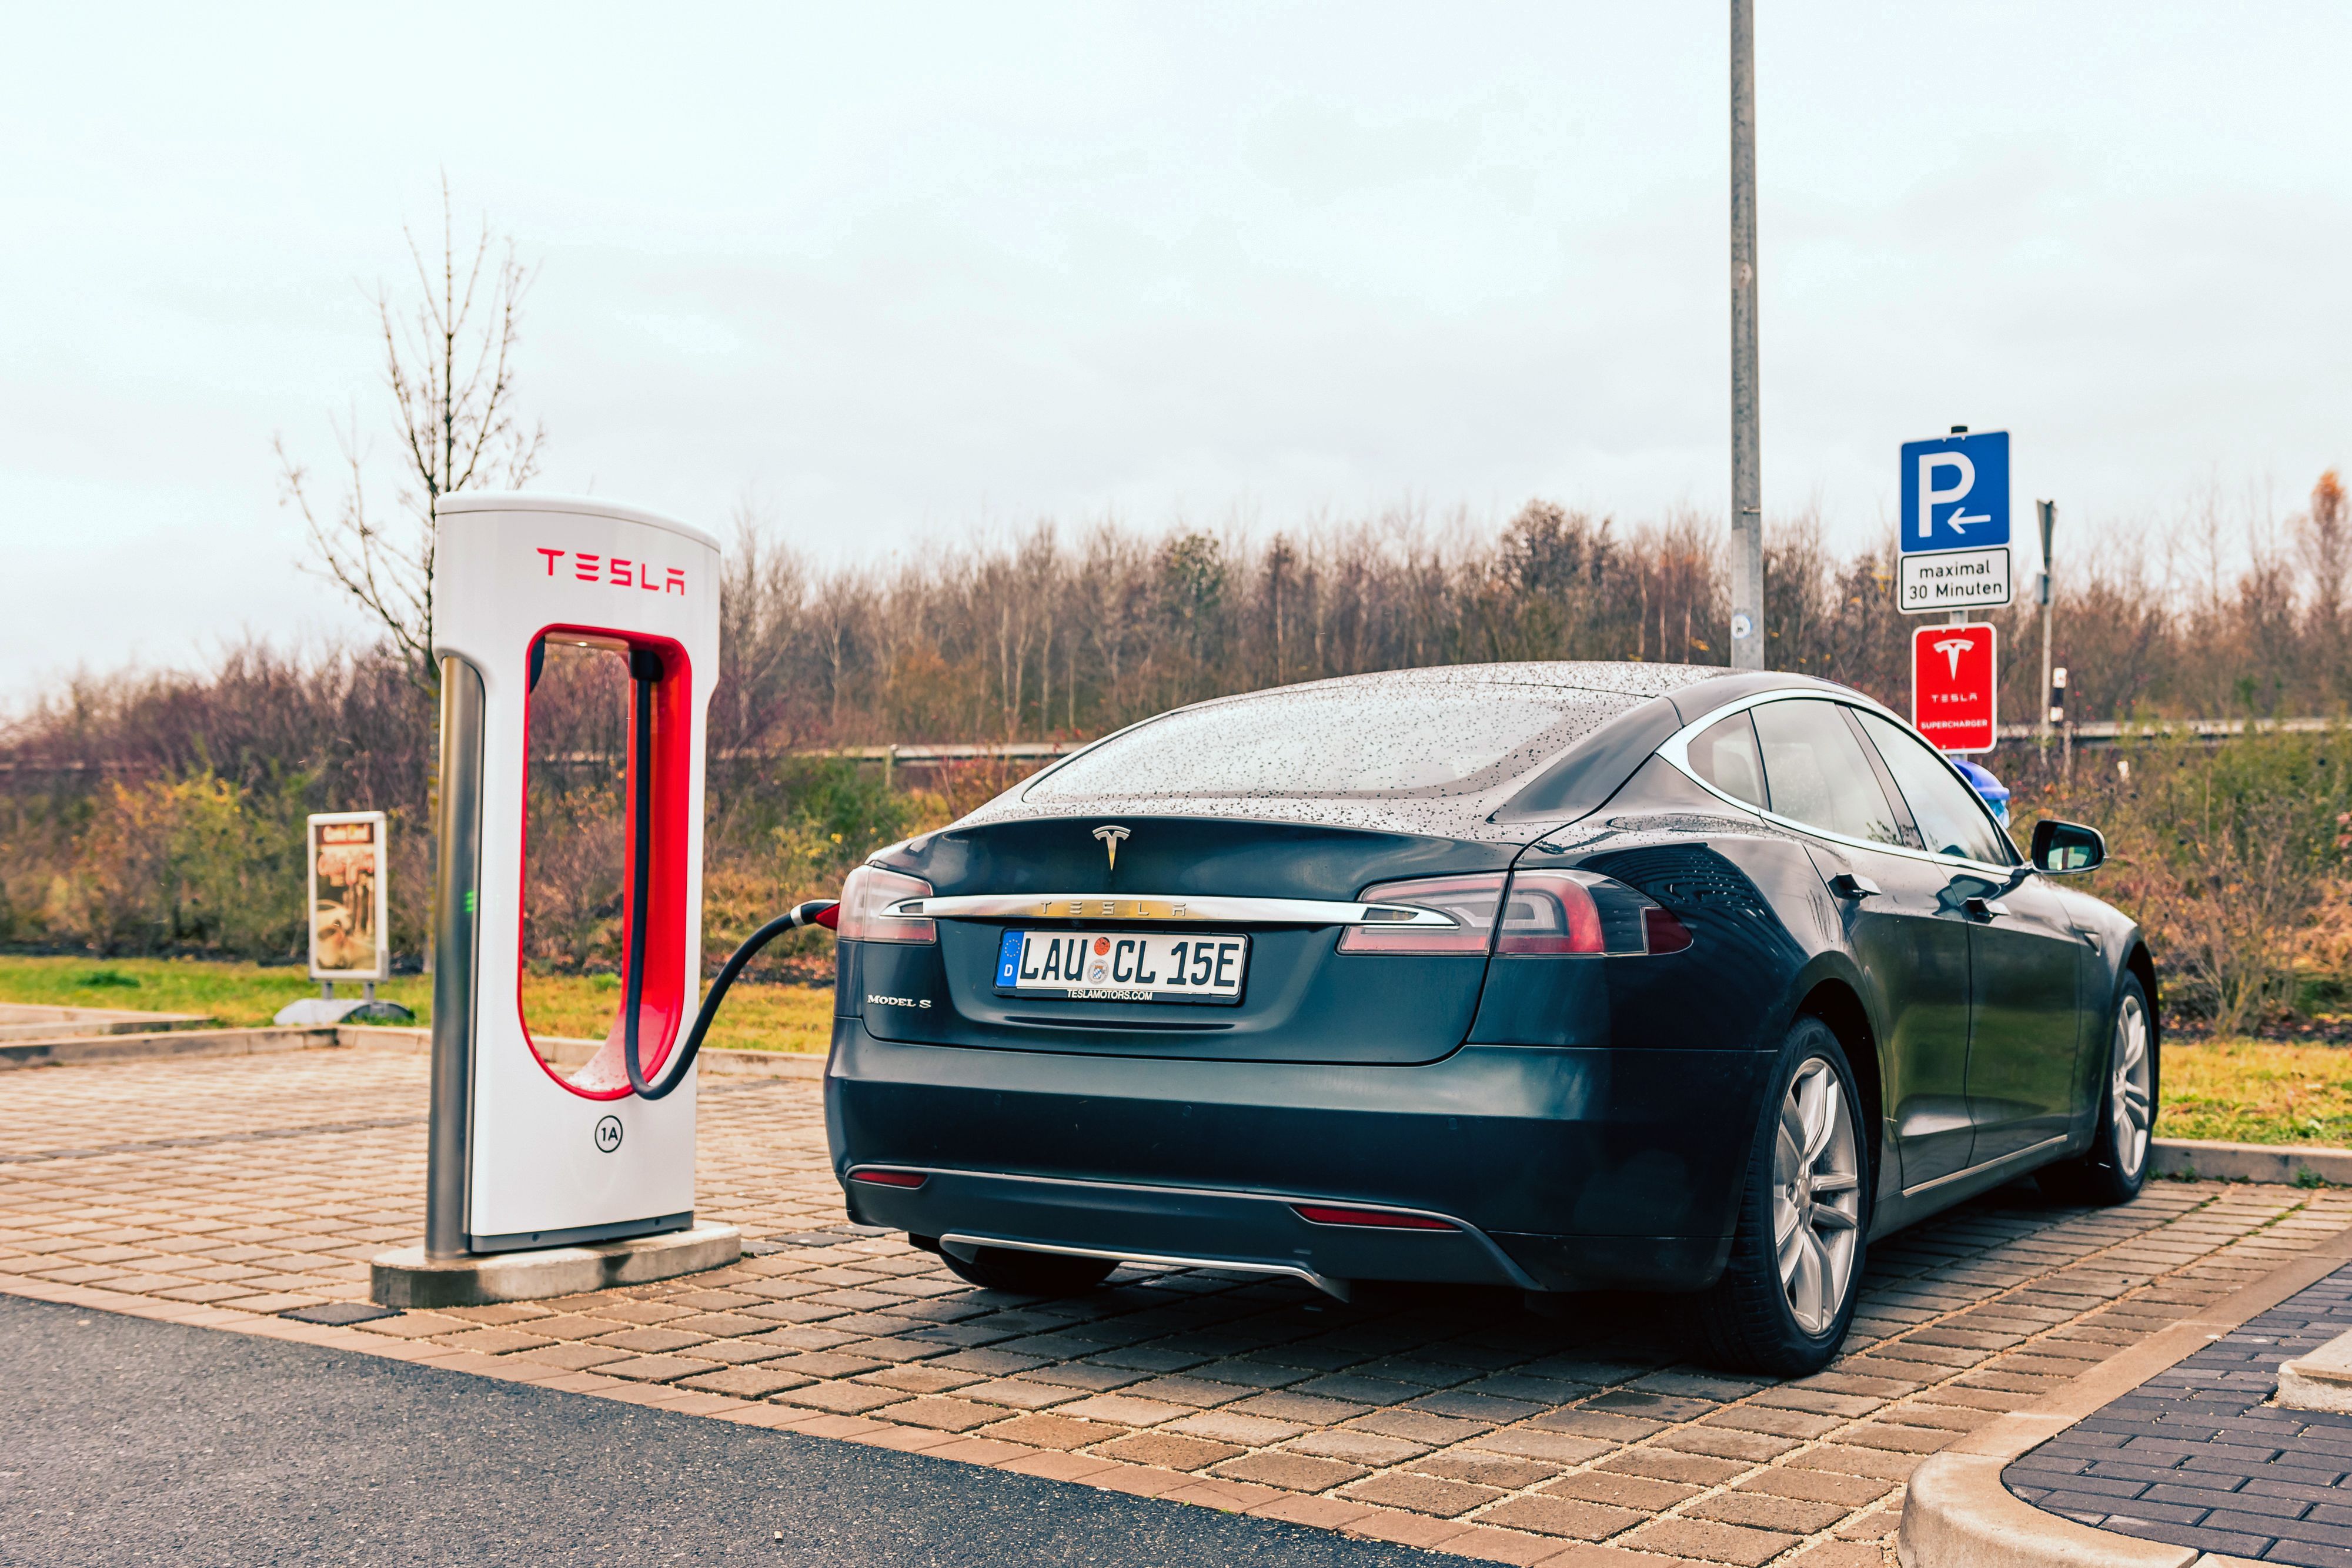 Model_S_charging_at_a_Tesla_Supercharger_station_in_Germany (1)